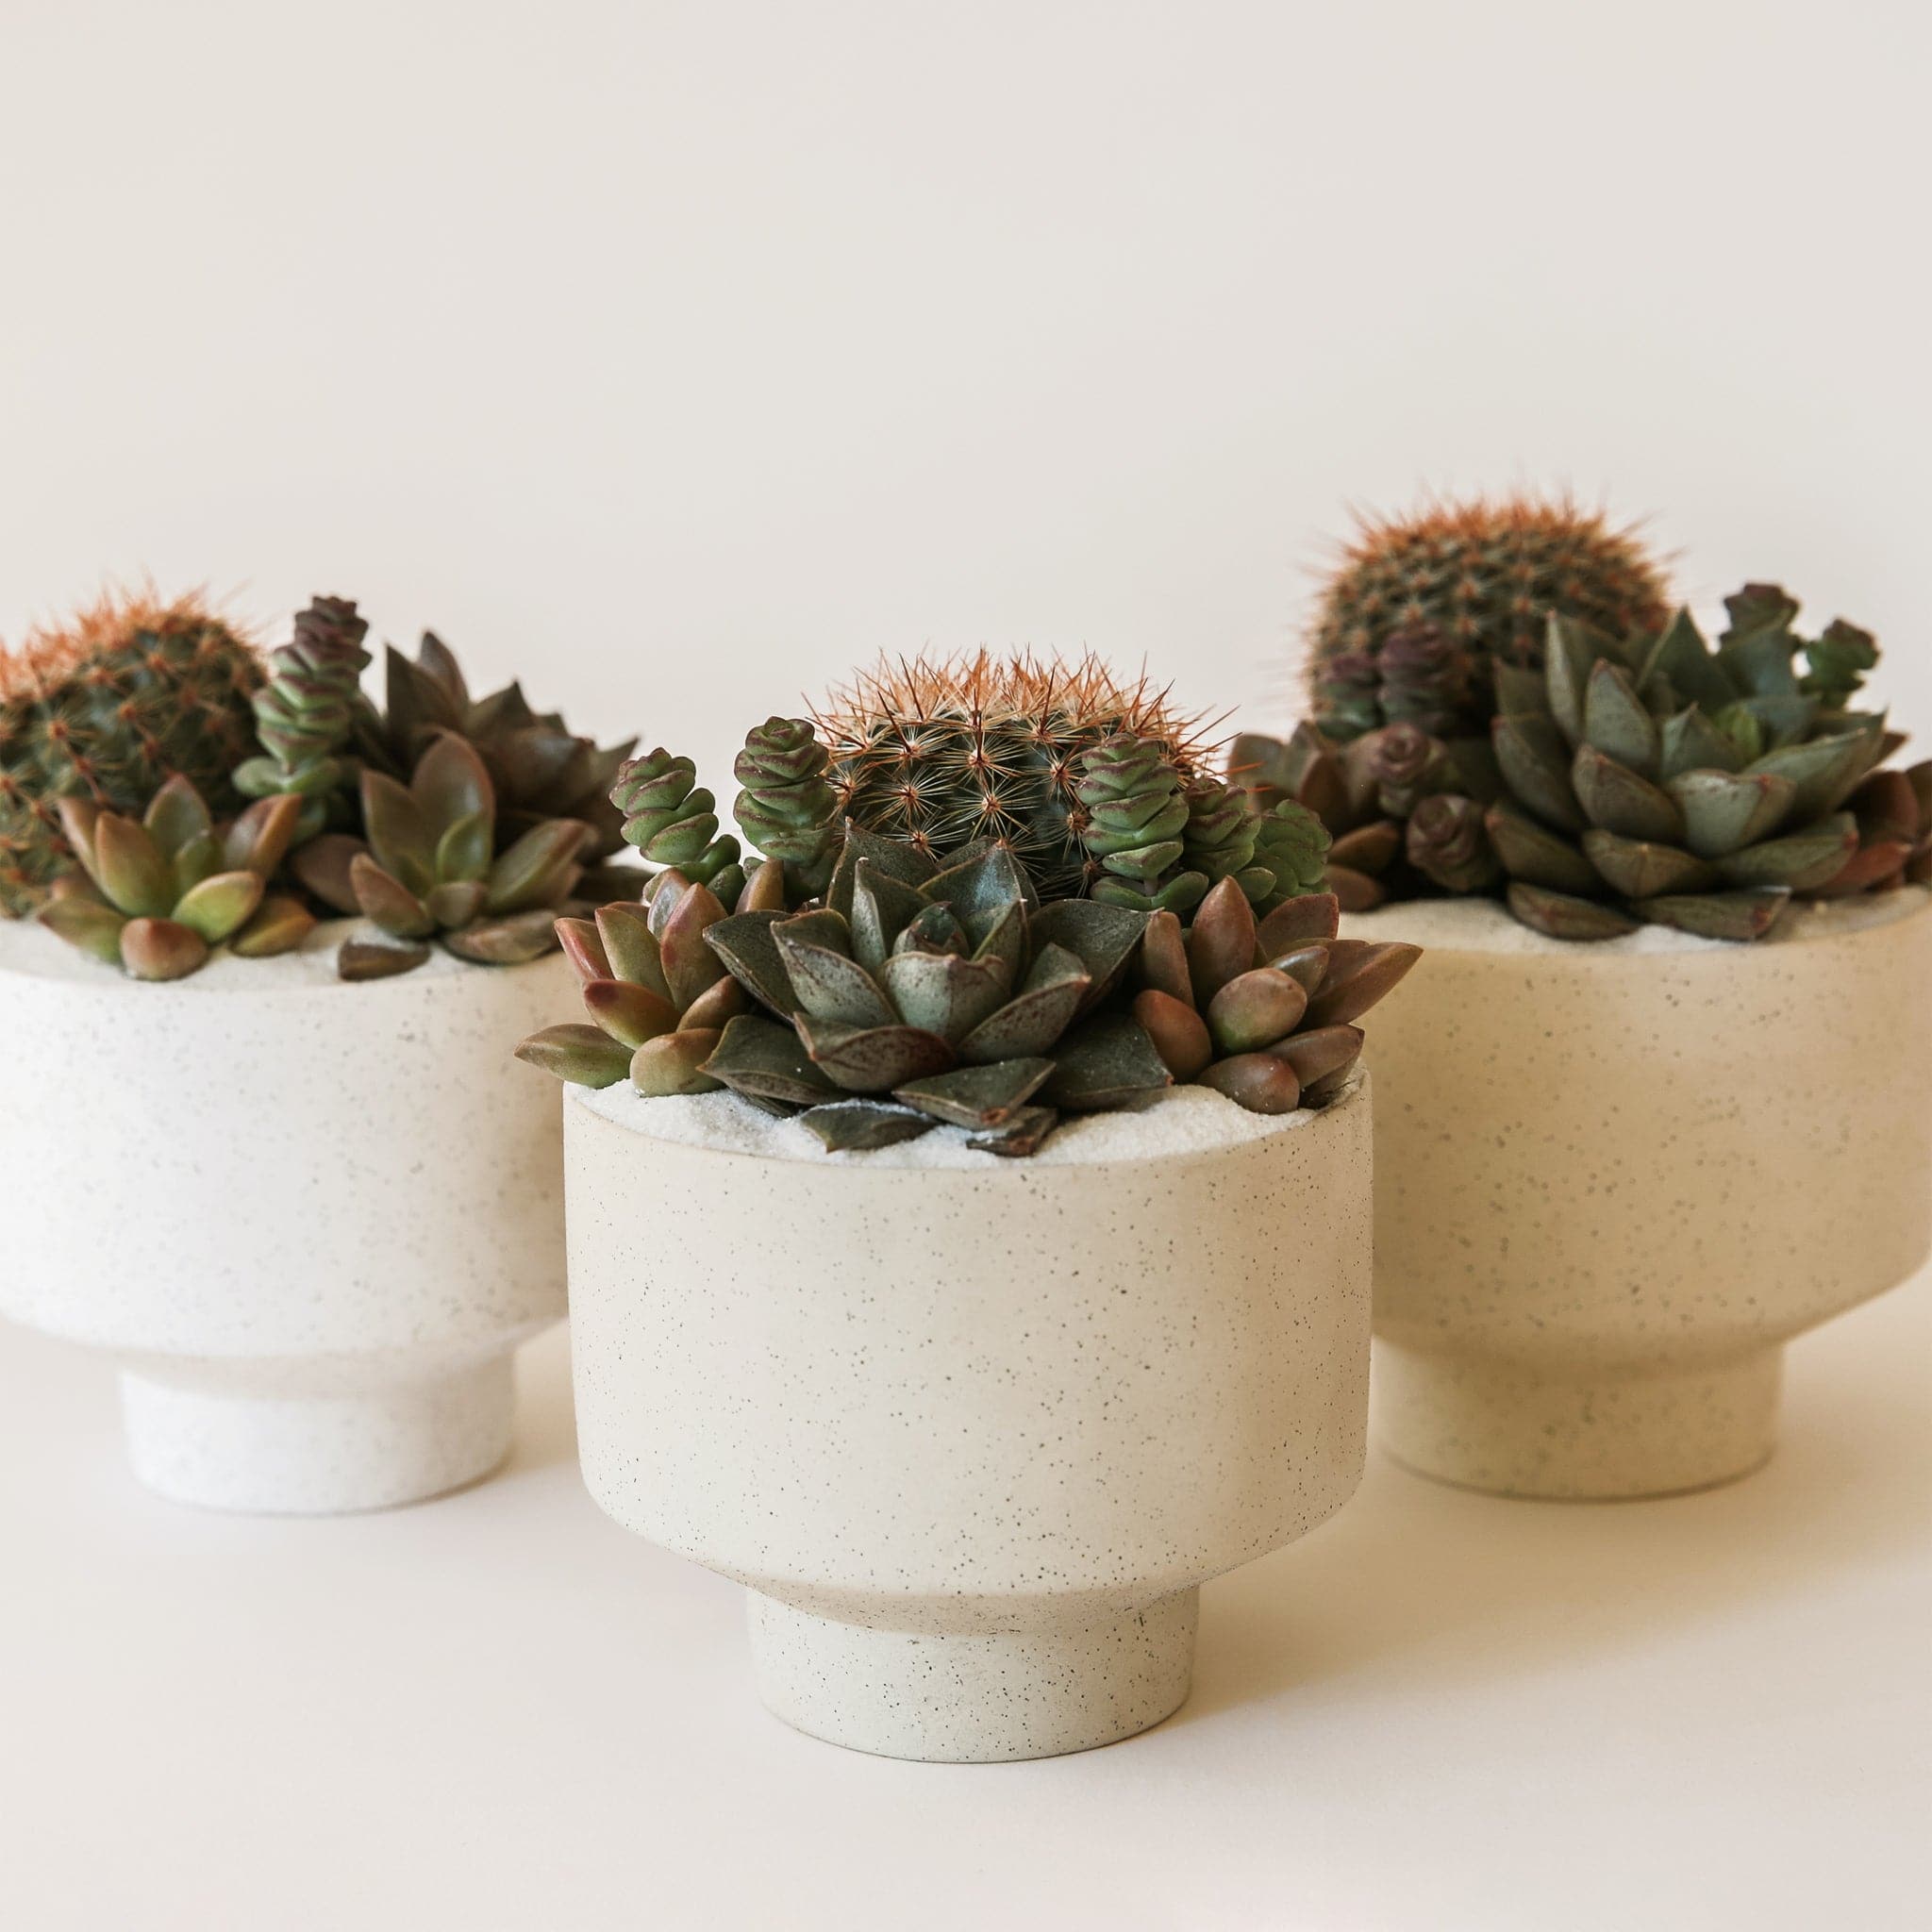 In front of a tan background is a three round, ceramic white pots with a tapered bottom. The pots have black speckles. Inside the pots is a mix of warm toned succulents and cacti. Surrounding the succulents and cacti is white sand. 